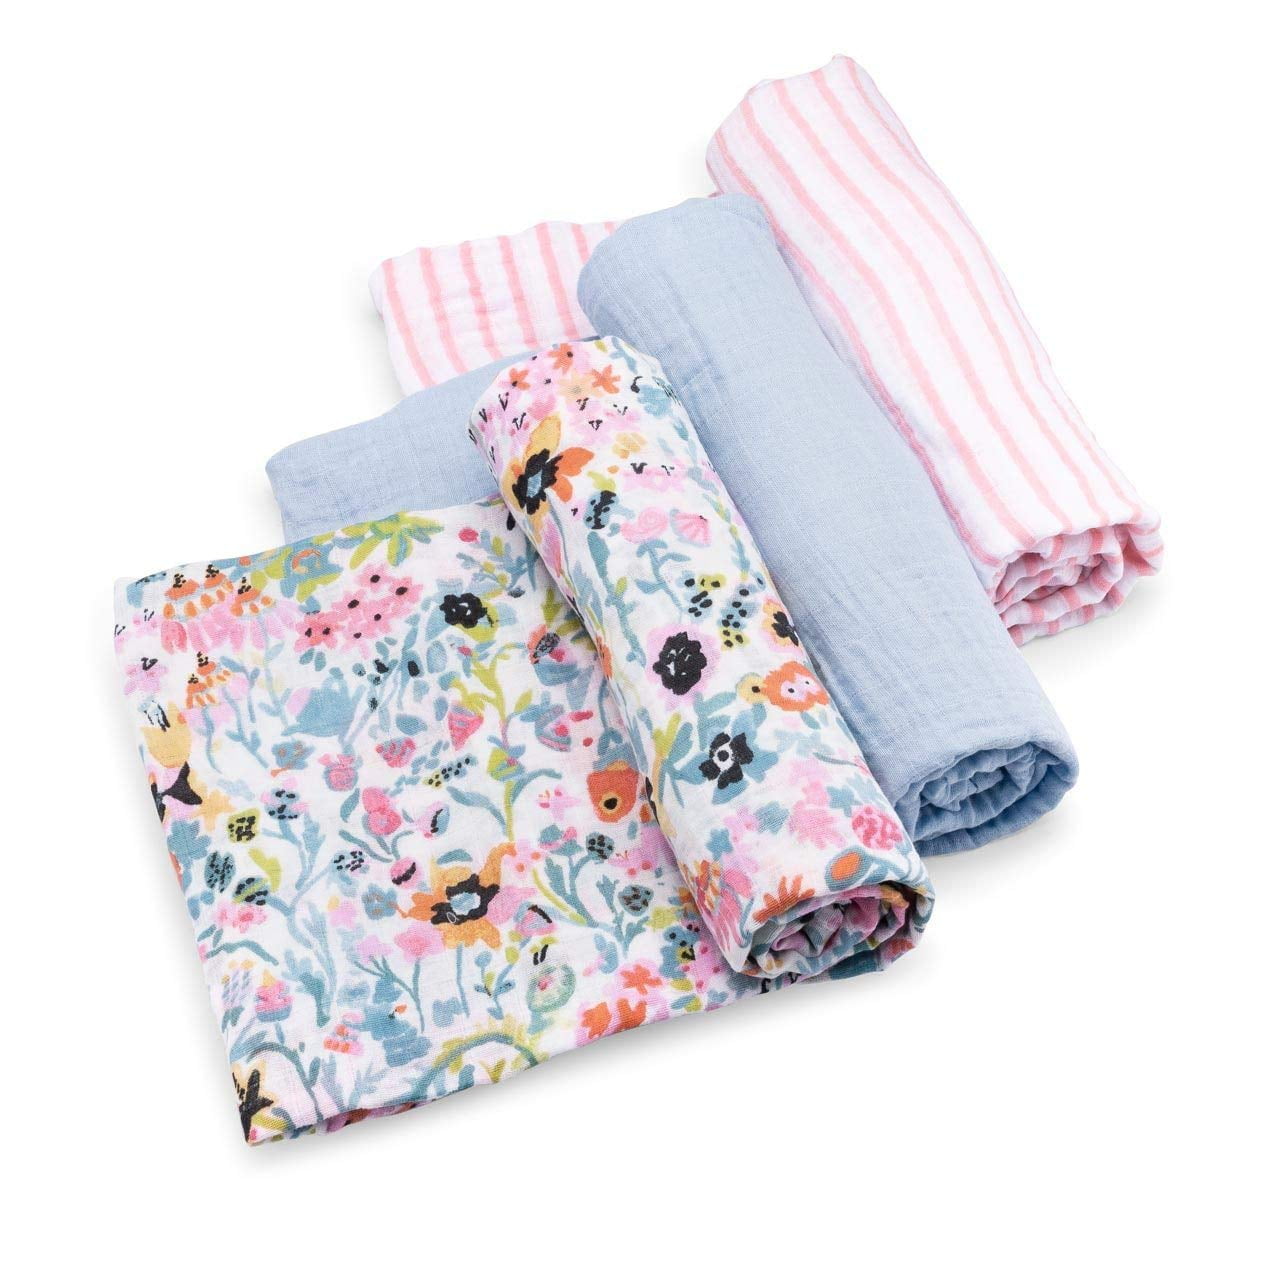 Multi-Purpose 100% Rayon made from Bamboo Deluxe Muslin Baby Swaddle Blankets 47x47 2 Pack GiftSet Little Unicorn Fairy Garden Set Premium Quality